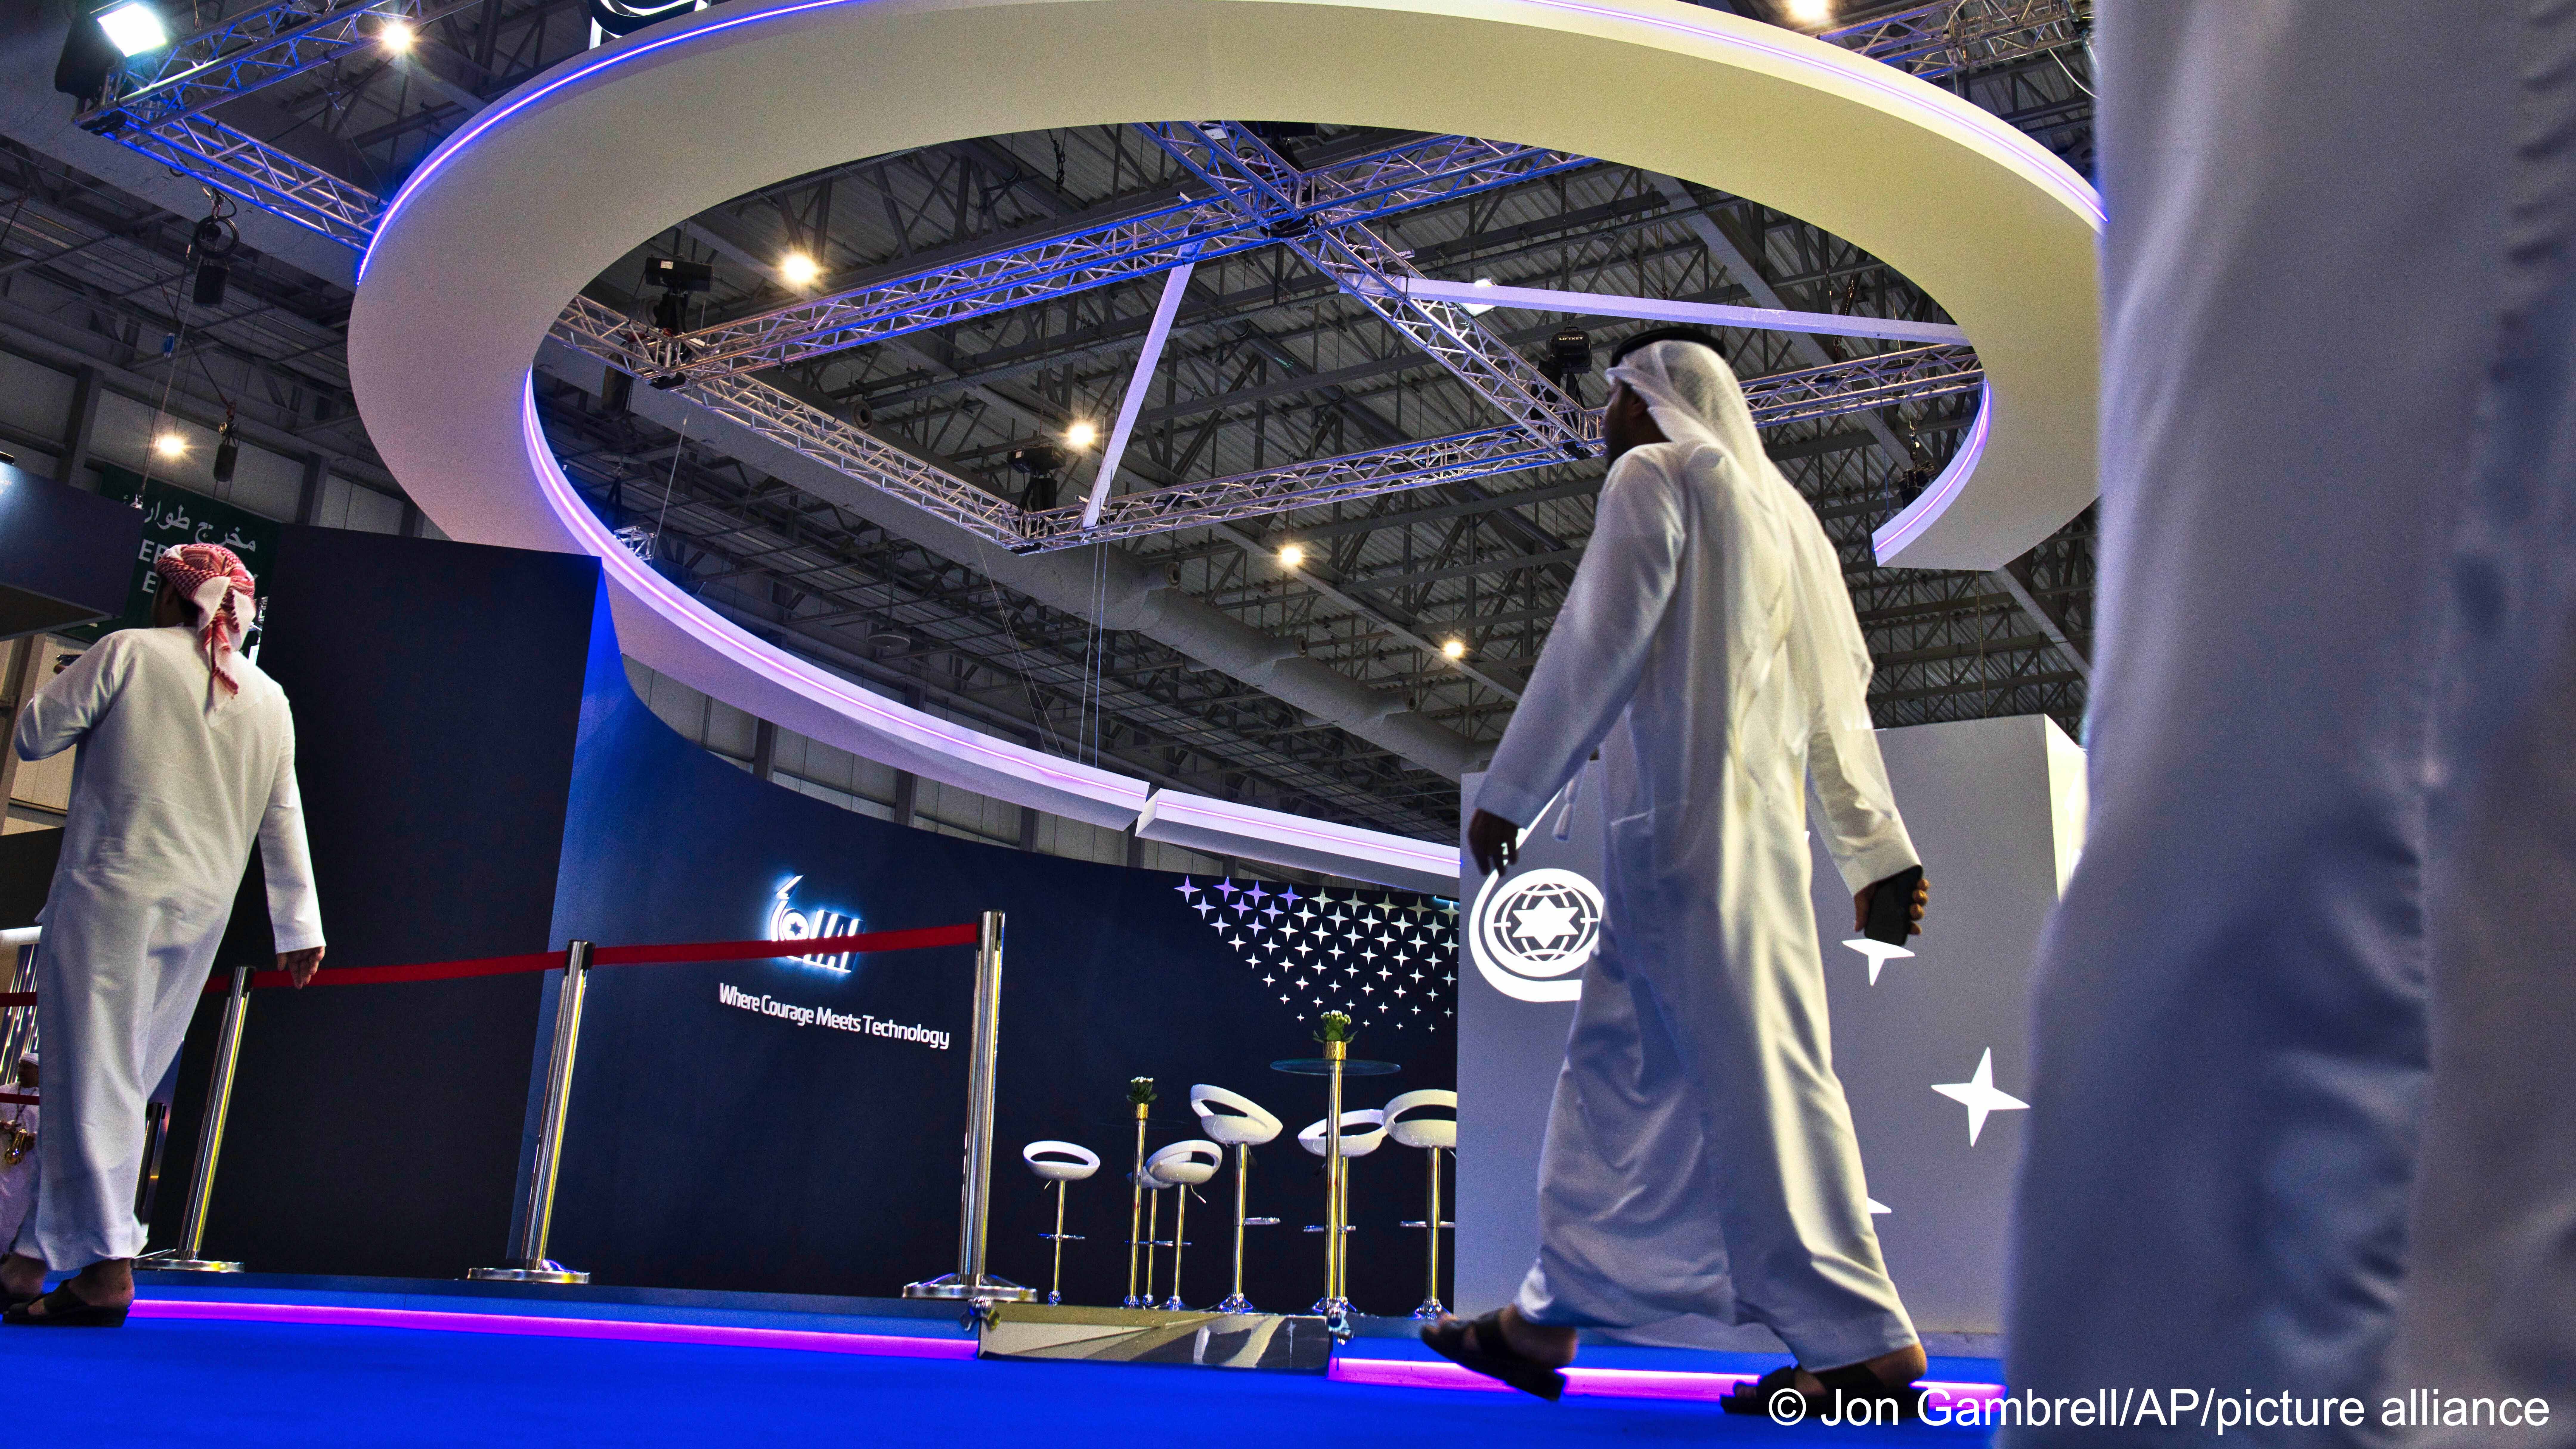 Men in Arab dress walk past an empty dark blue exhibition stand with a curved white ceiling element